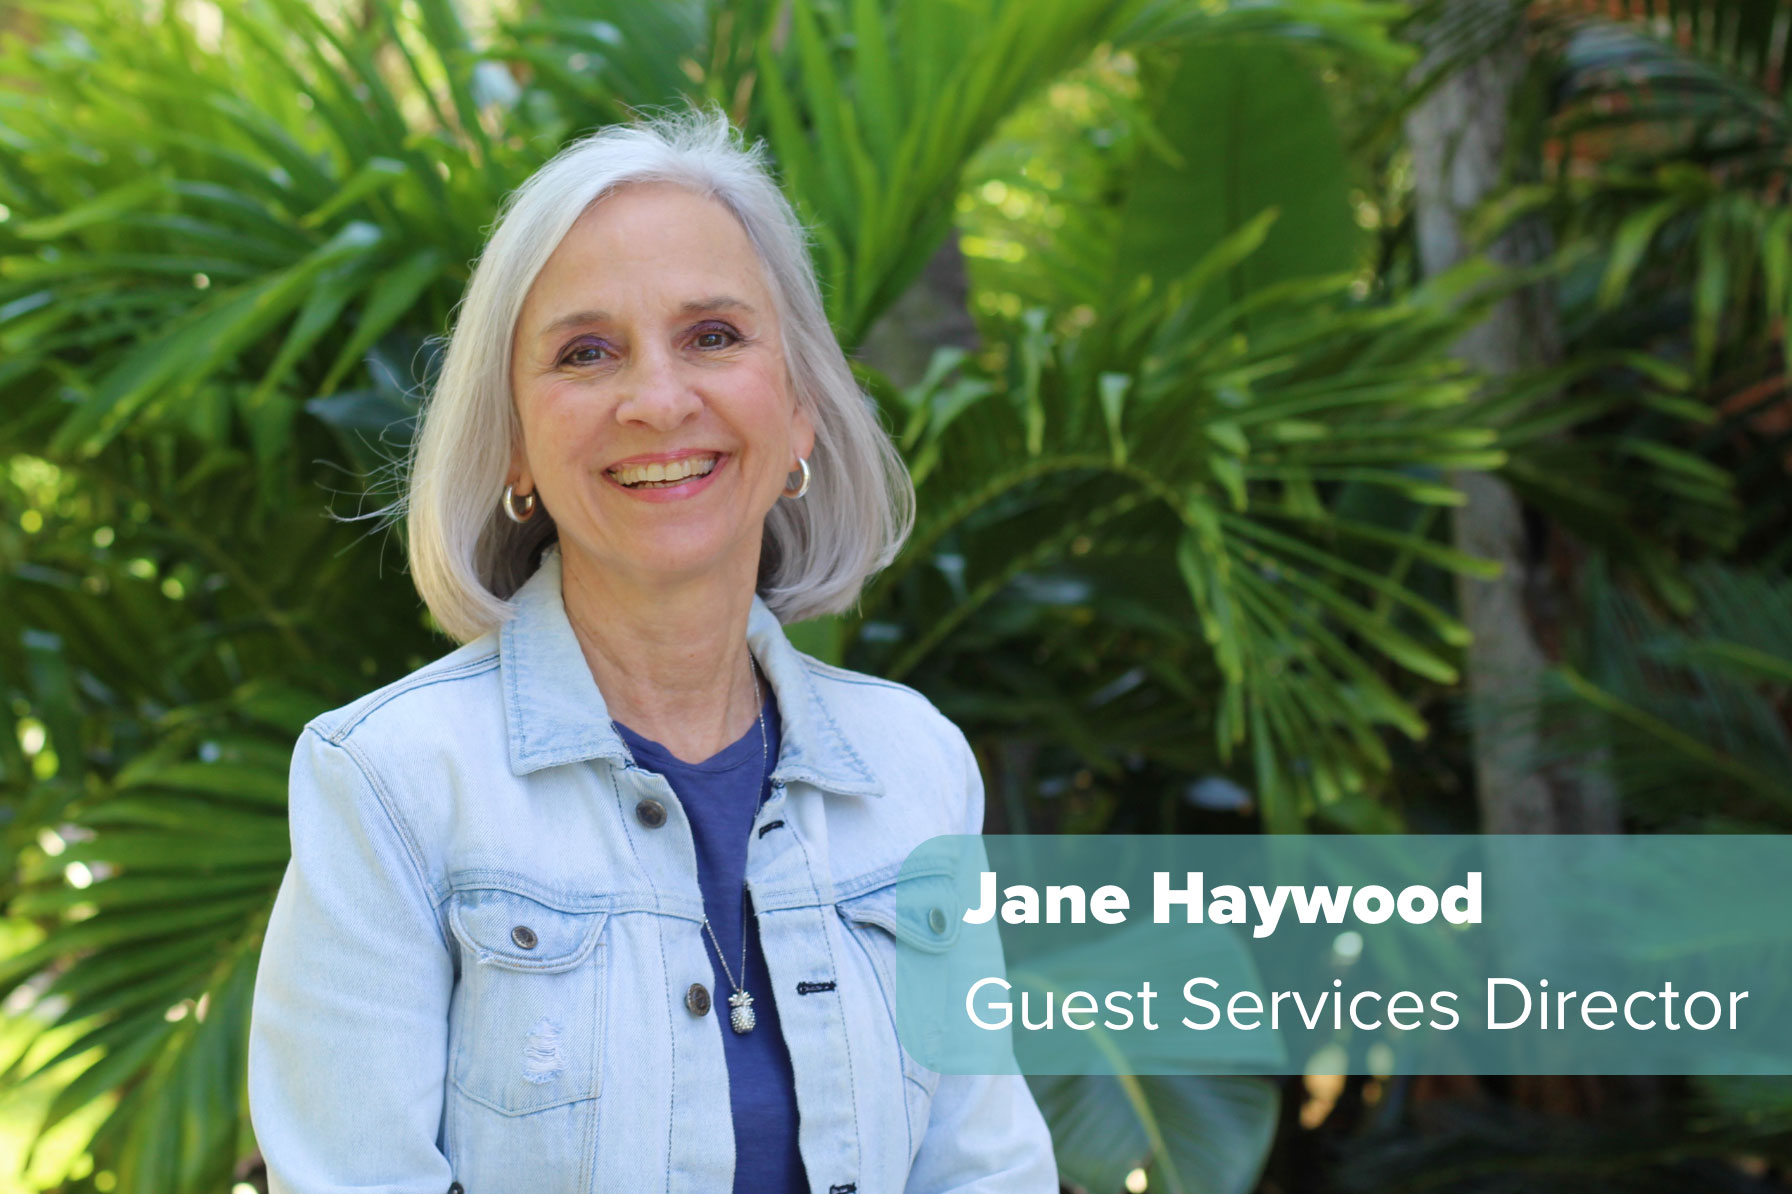 Jane Haywood, Guest Services